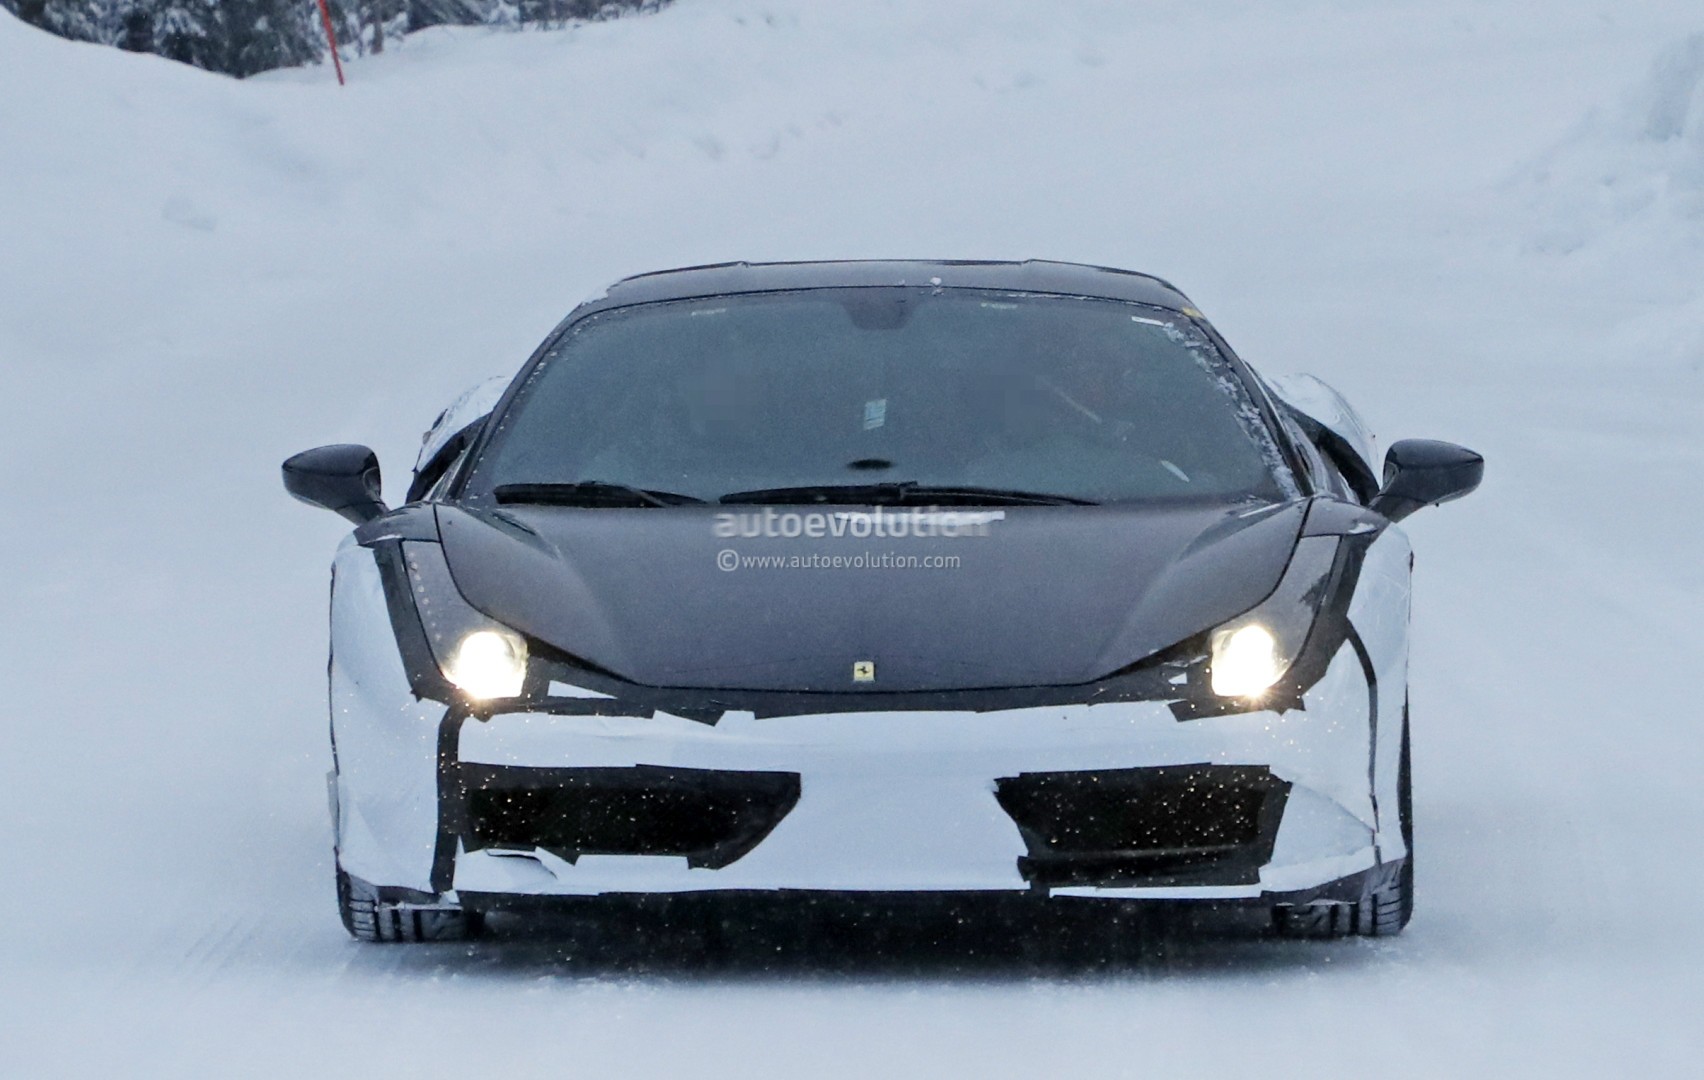 2019 - [Ferrari] Roma [F169] - Page 2 New-ferrari-dino-spied-testing-in-sweden-as-458-test-mule-with-v6-soundtrack_1